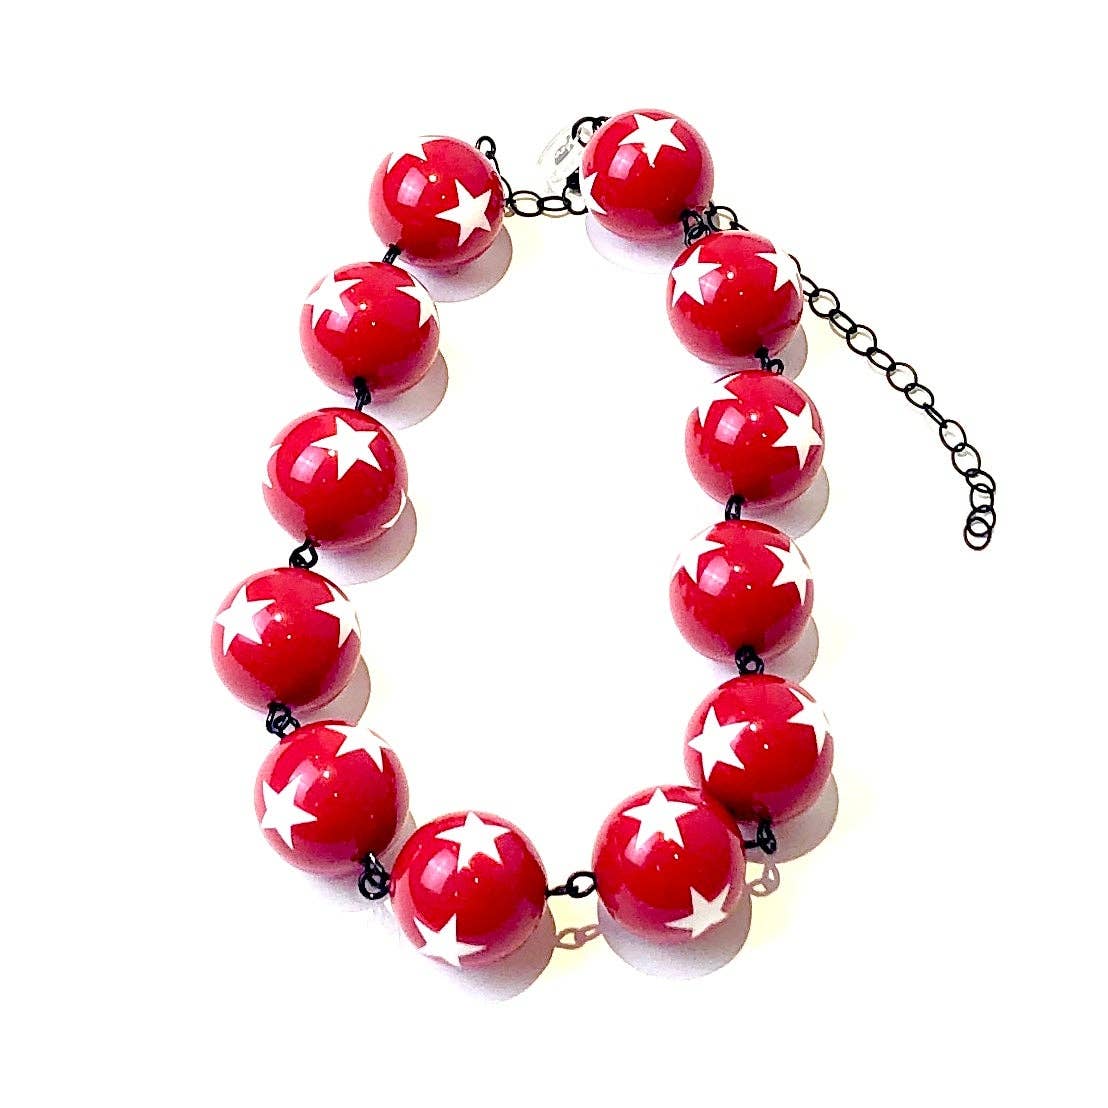 Vintage Chunky Red and White Plastic Bead Necklace with Hidden Screw Clasp  20 inch 1980s 80s Jewelry Harlequin Pattern | Felt in My Heart Vintage